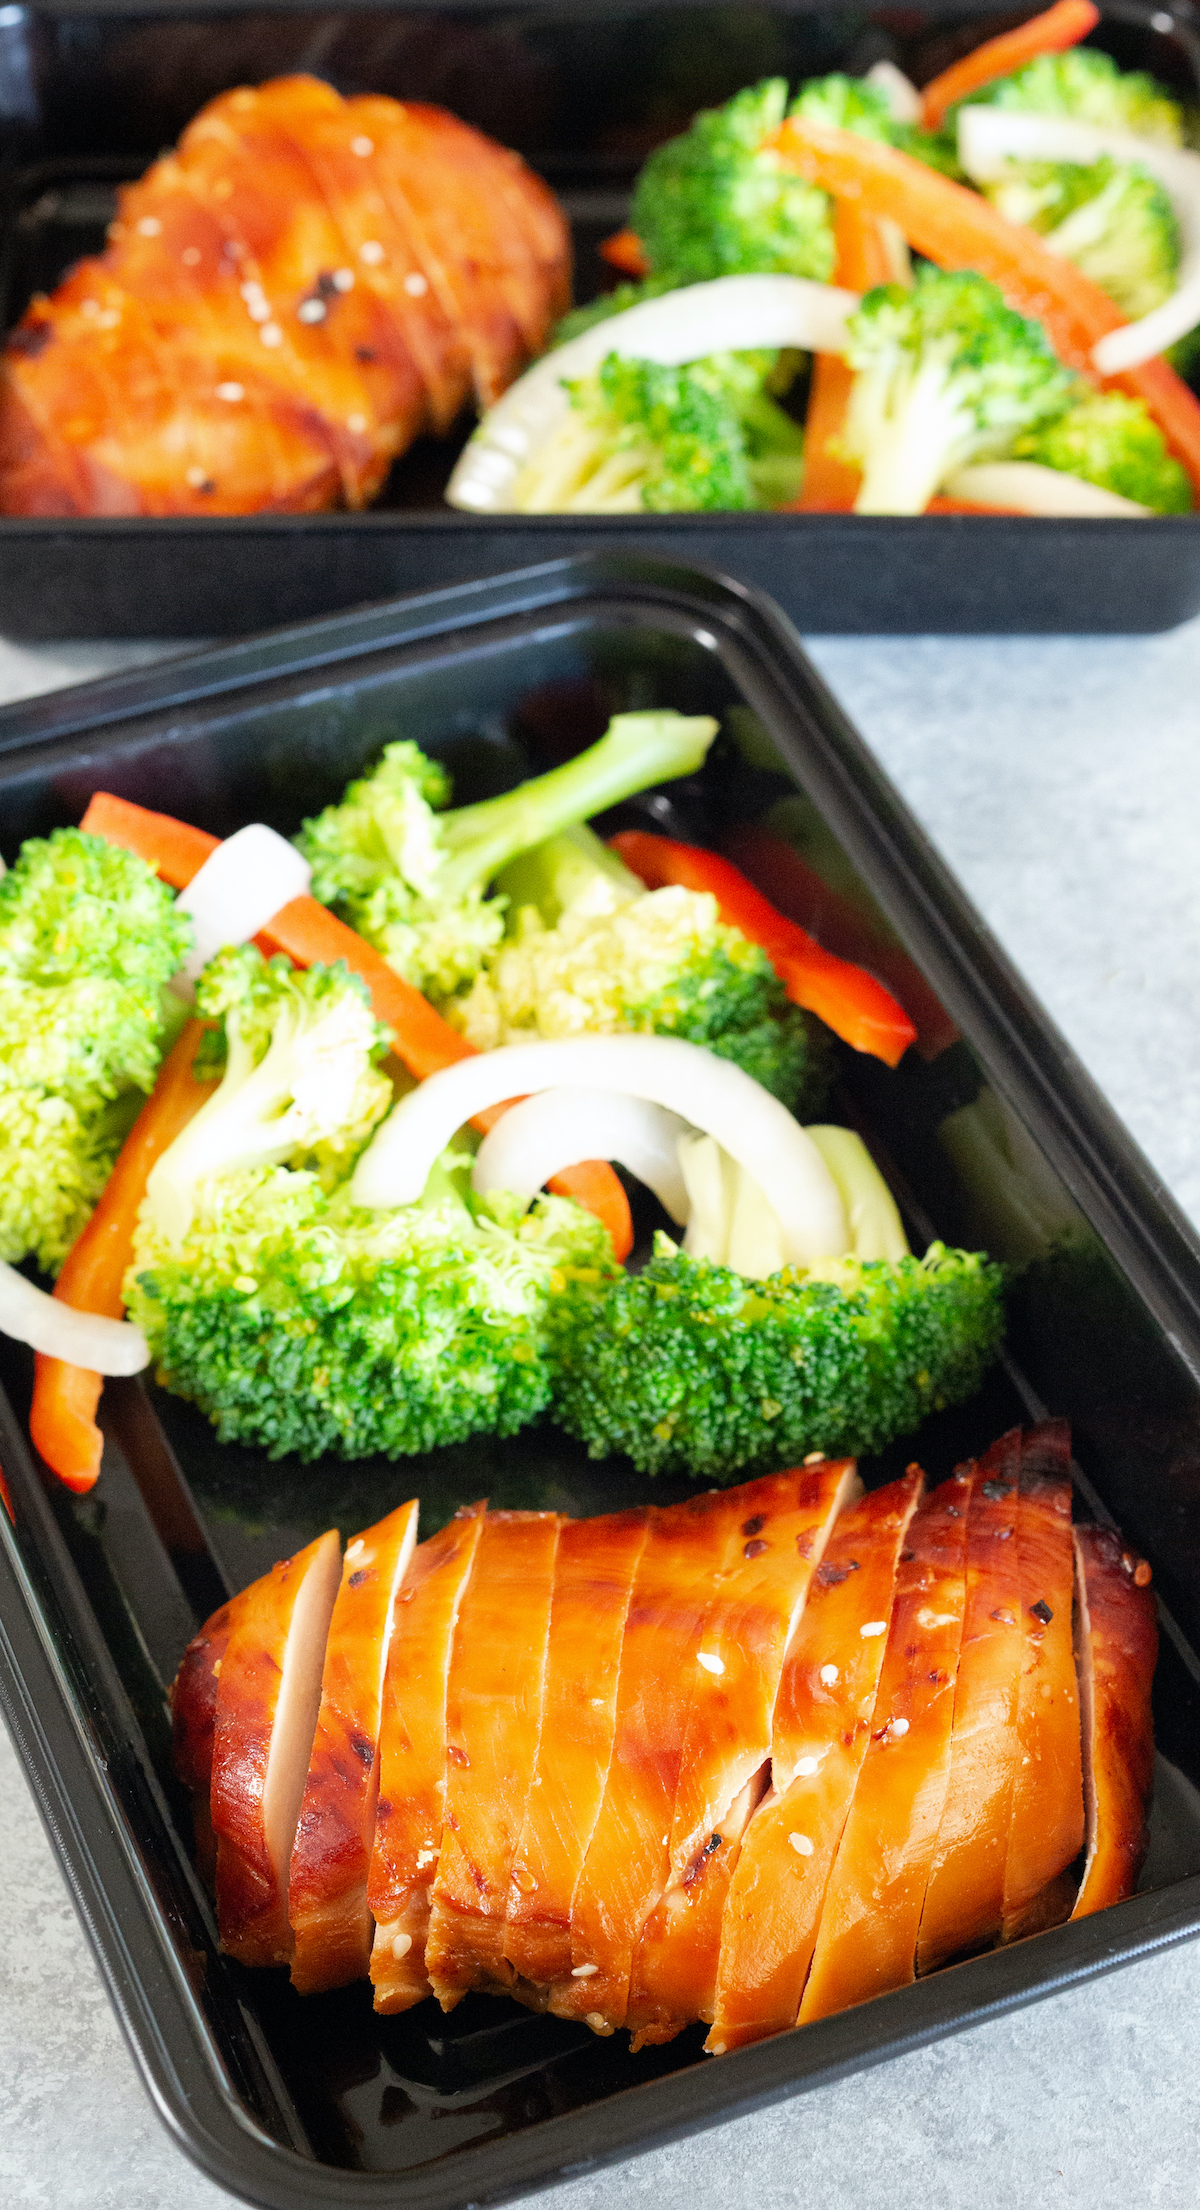 A black plastic meal prep container with a sliced teriyaki chicken breast and vegetables is in focus in the foreground, with a another container out of focus in the background.